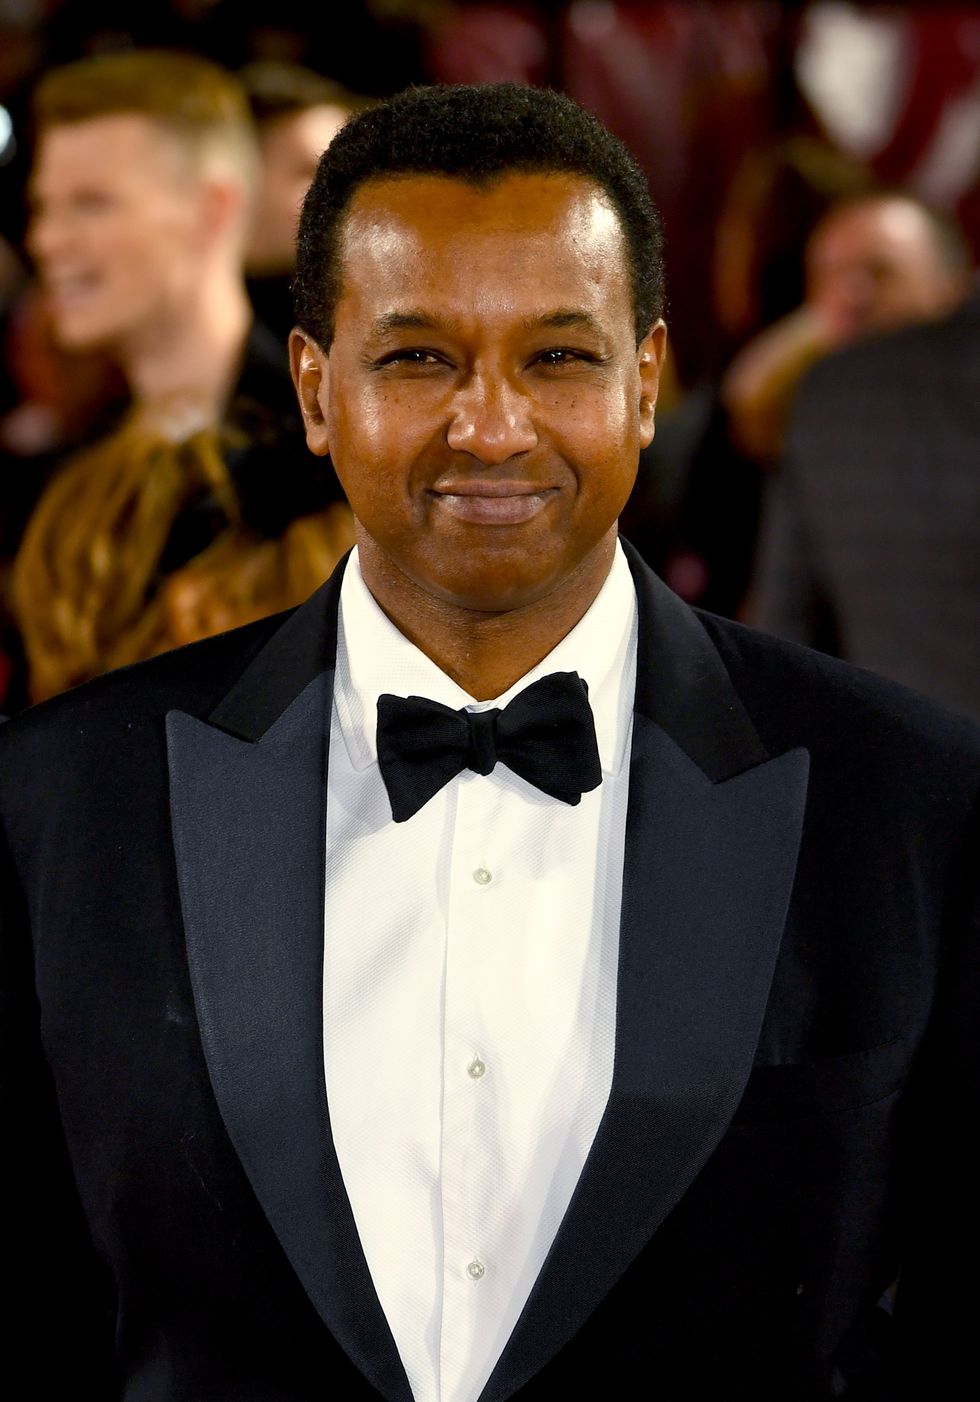 rageh omaar attends an event in 2019, wearing a tuxedo and bow tie